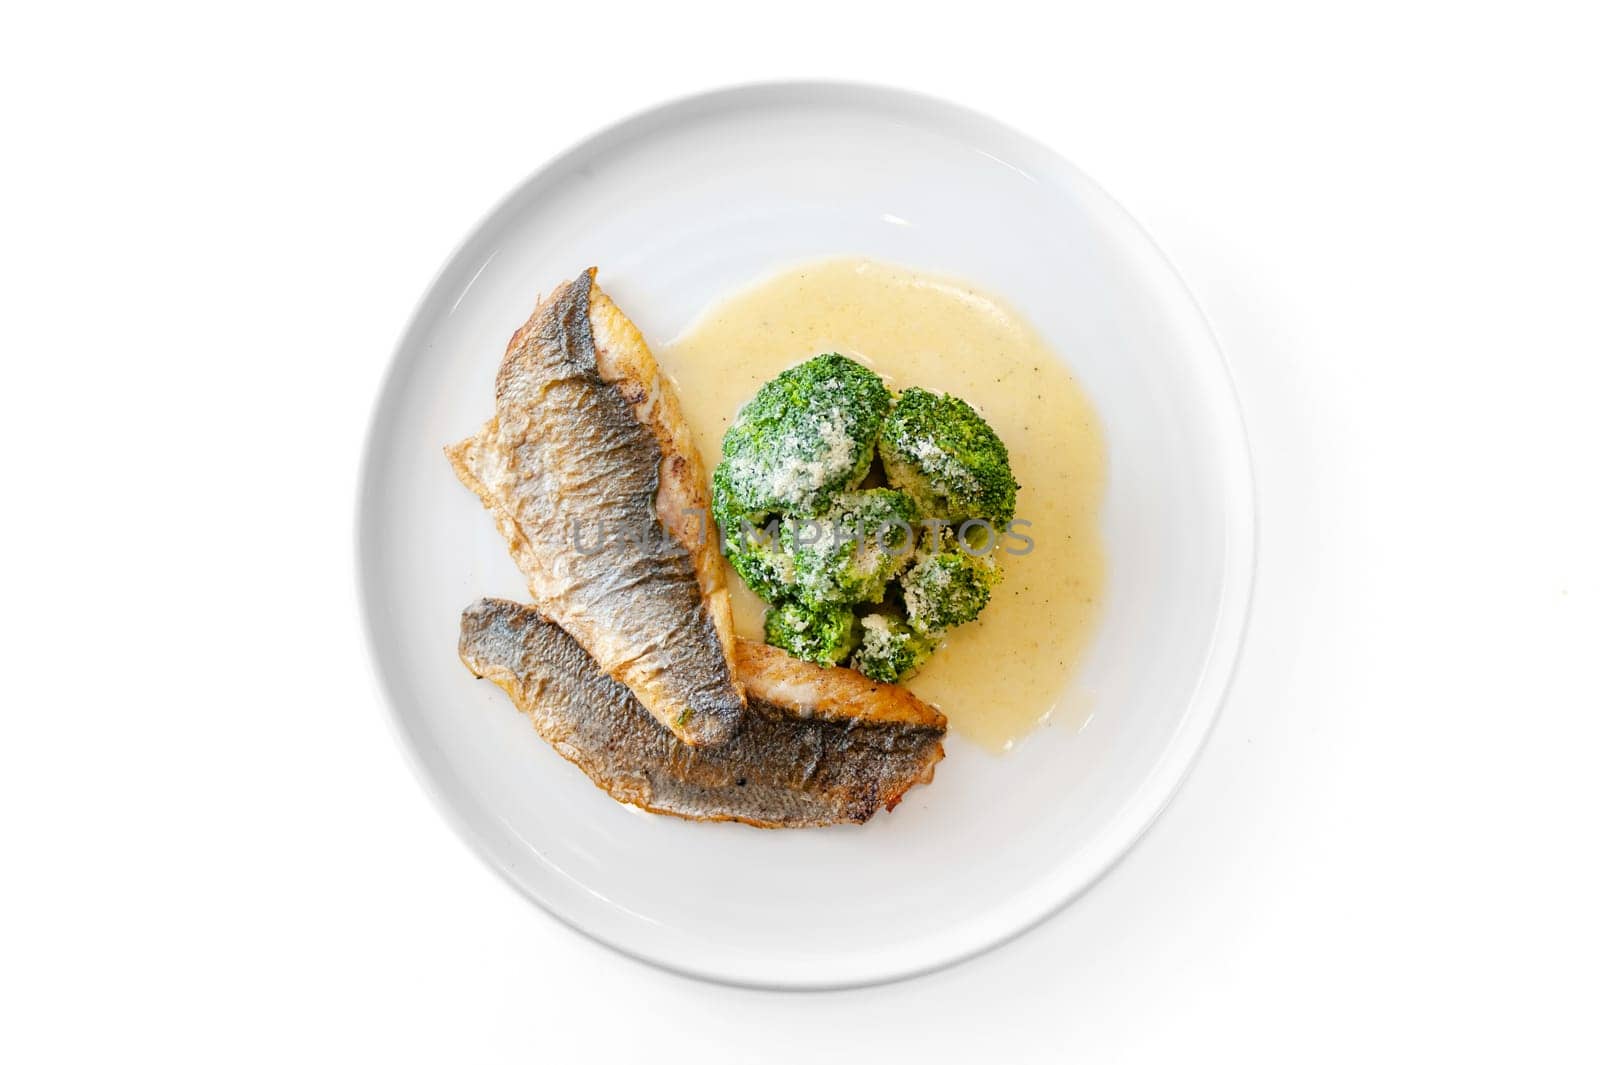 Dorado or sea bass fillet in cream sauce with broccoli on a white plate. High quality photo